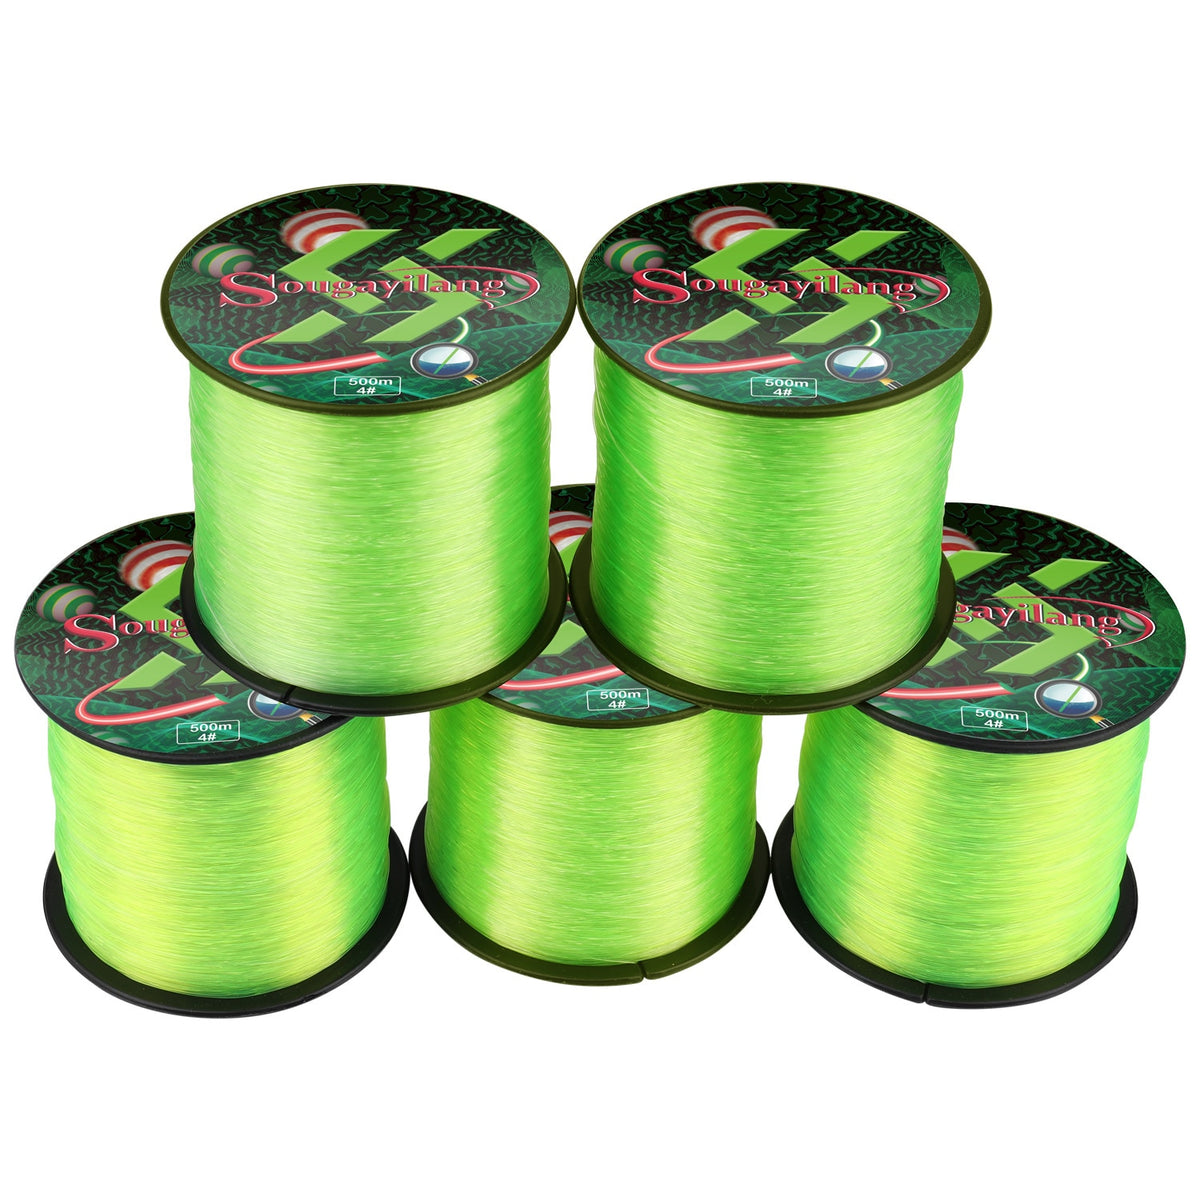 1pc 500m Extra Strong Nylon Fishing Line Colorful Lure Line